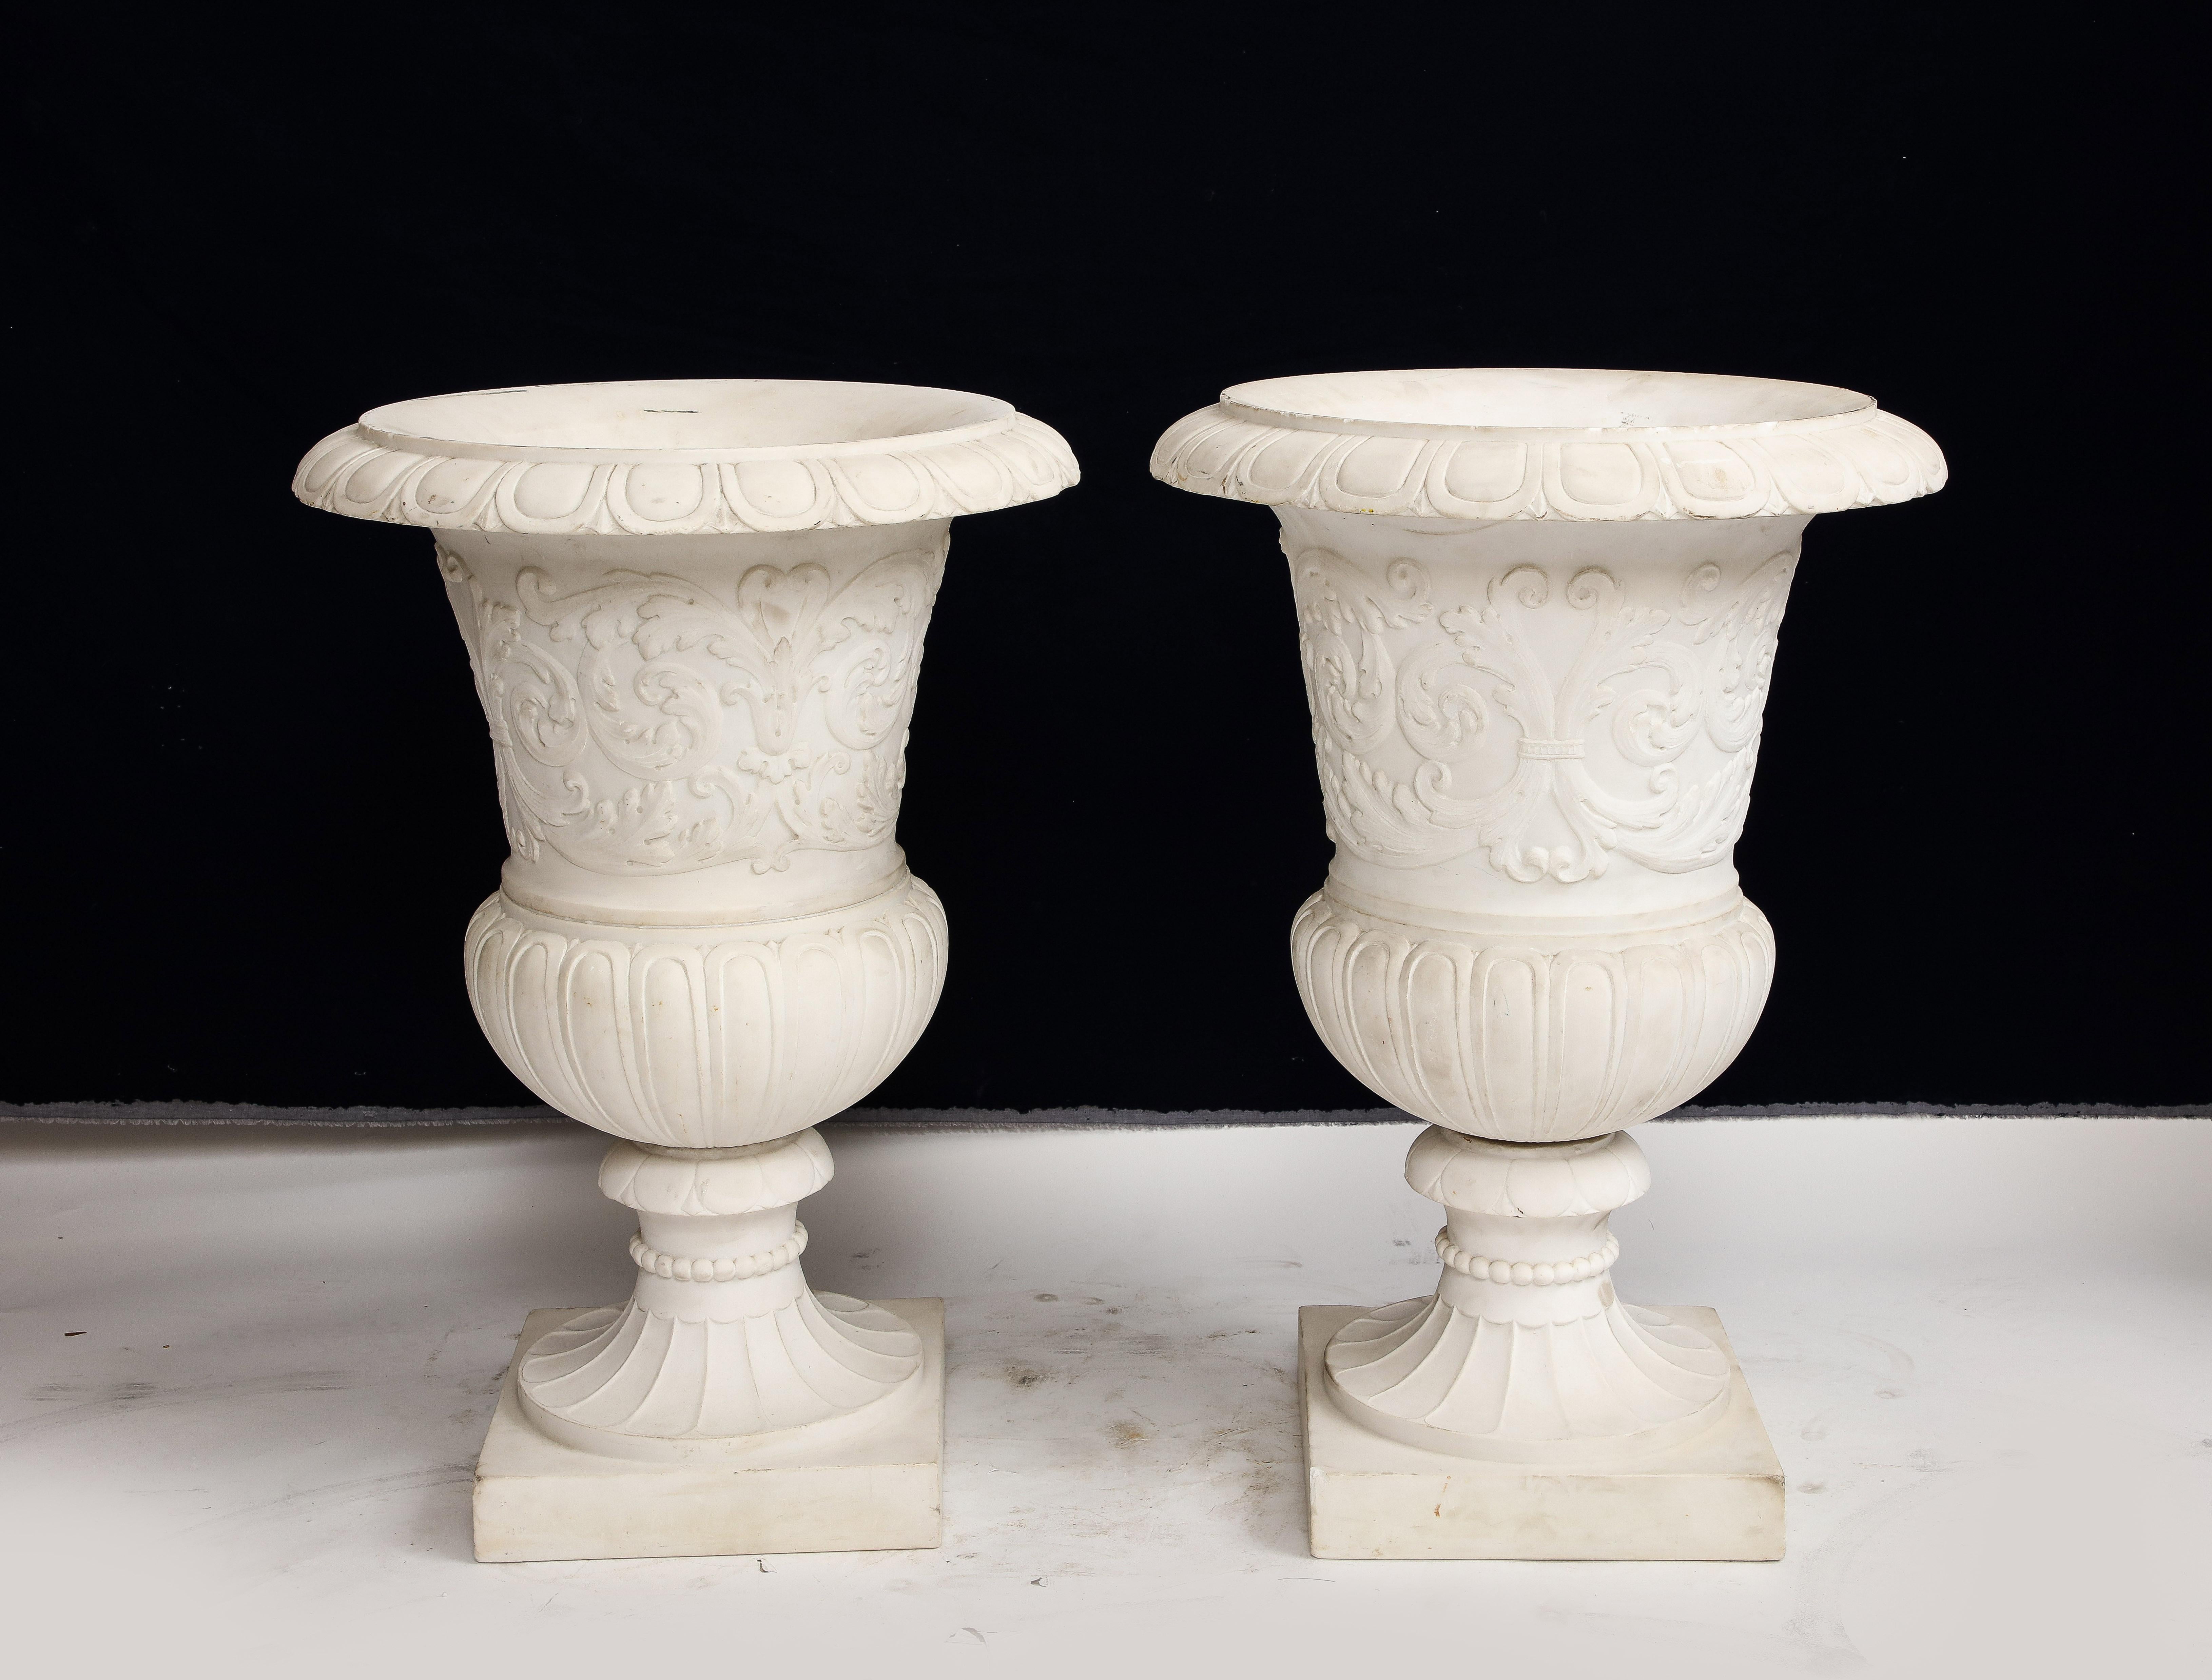 Late 19th Century Pair of Italian Carrara Marble Medici Vases w/ Neoclassical Motifs in Relief For Sale